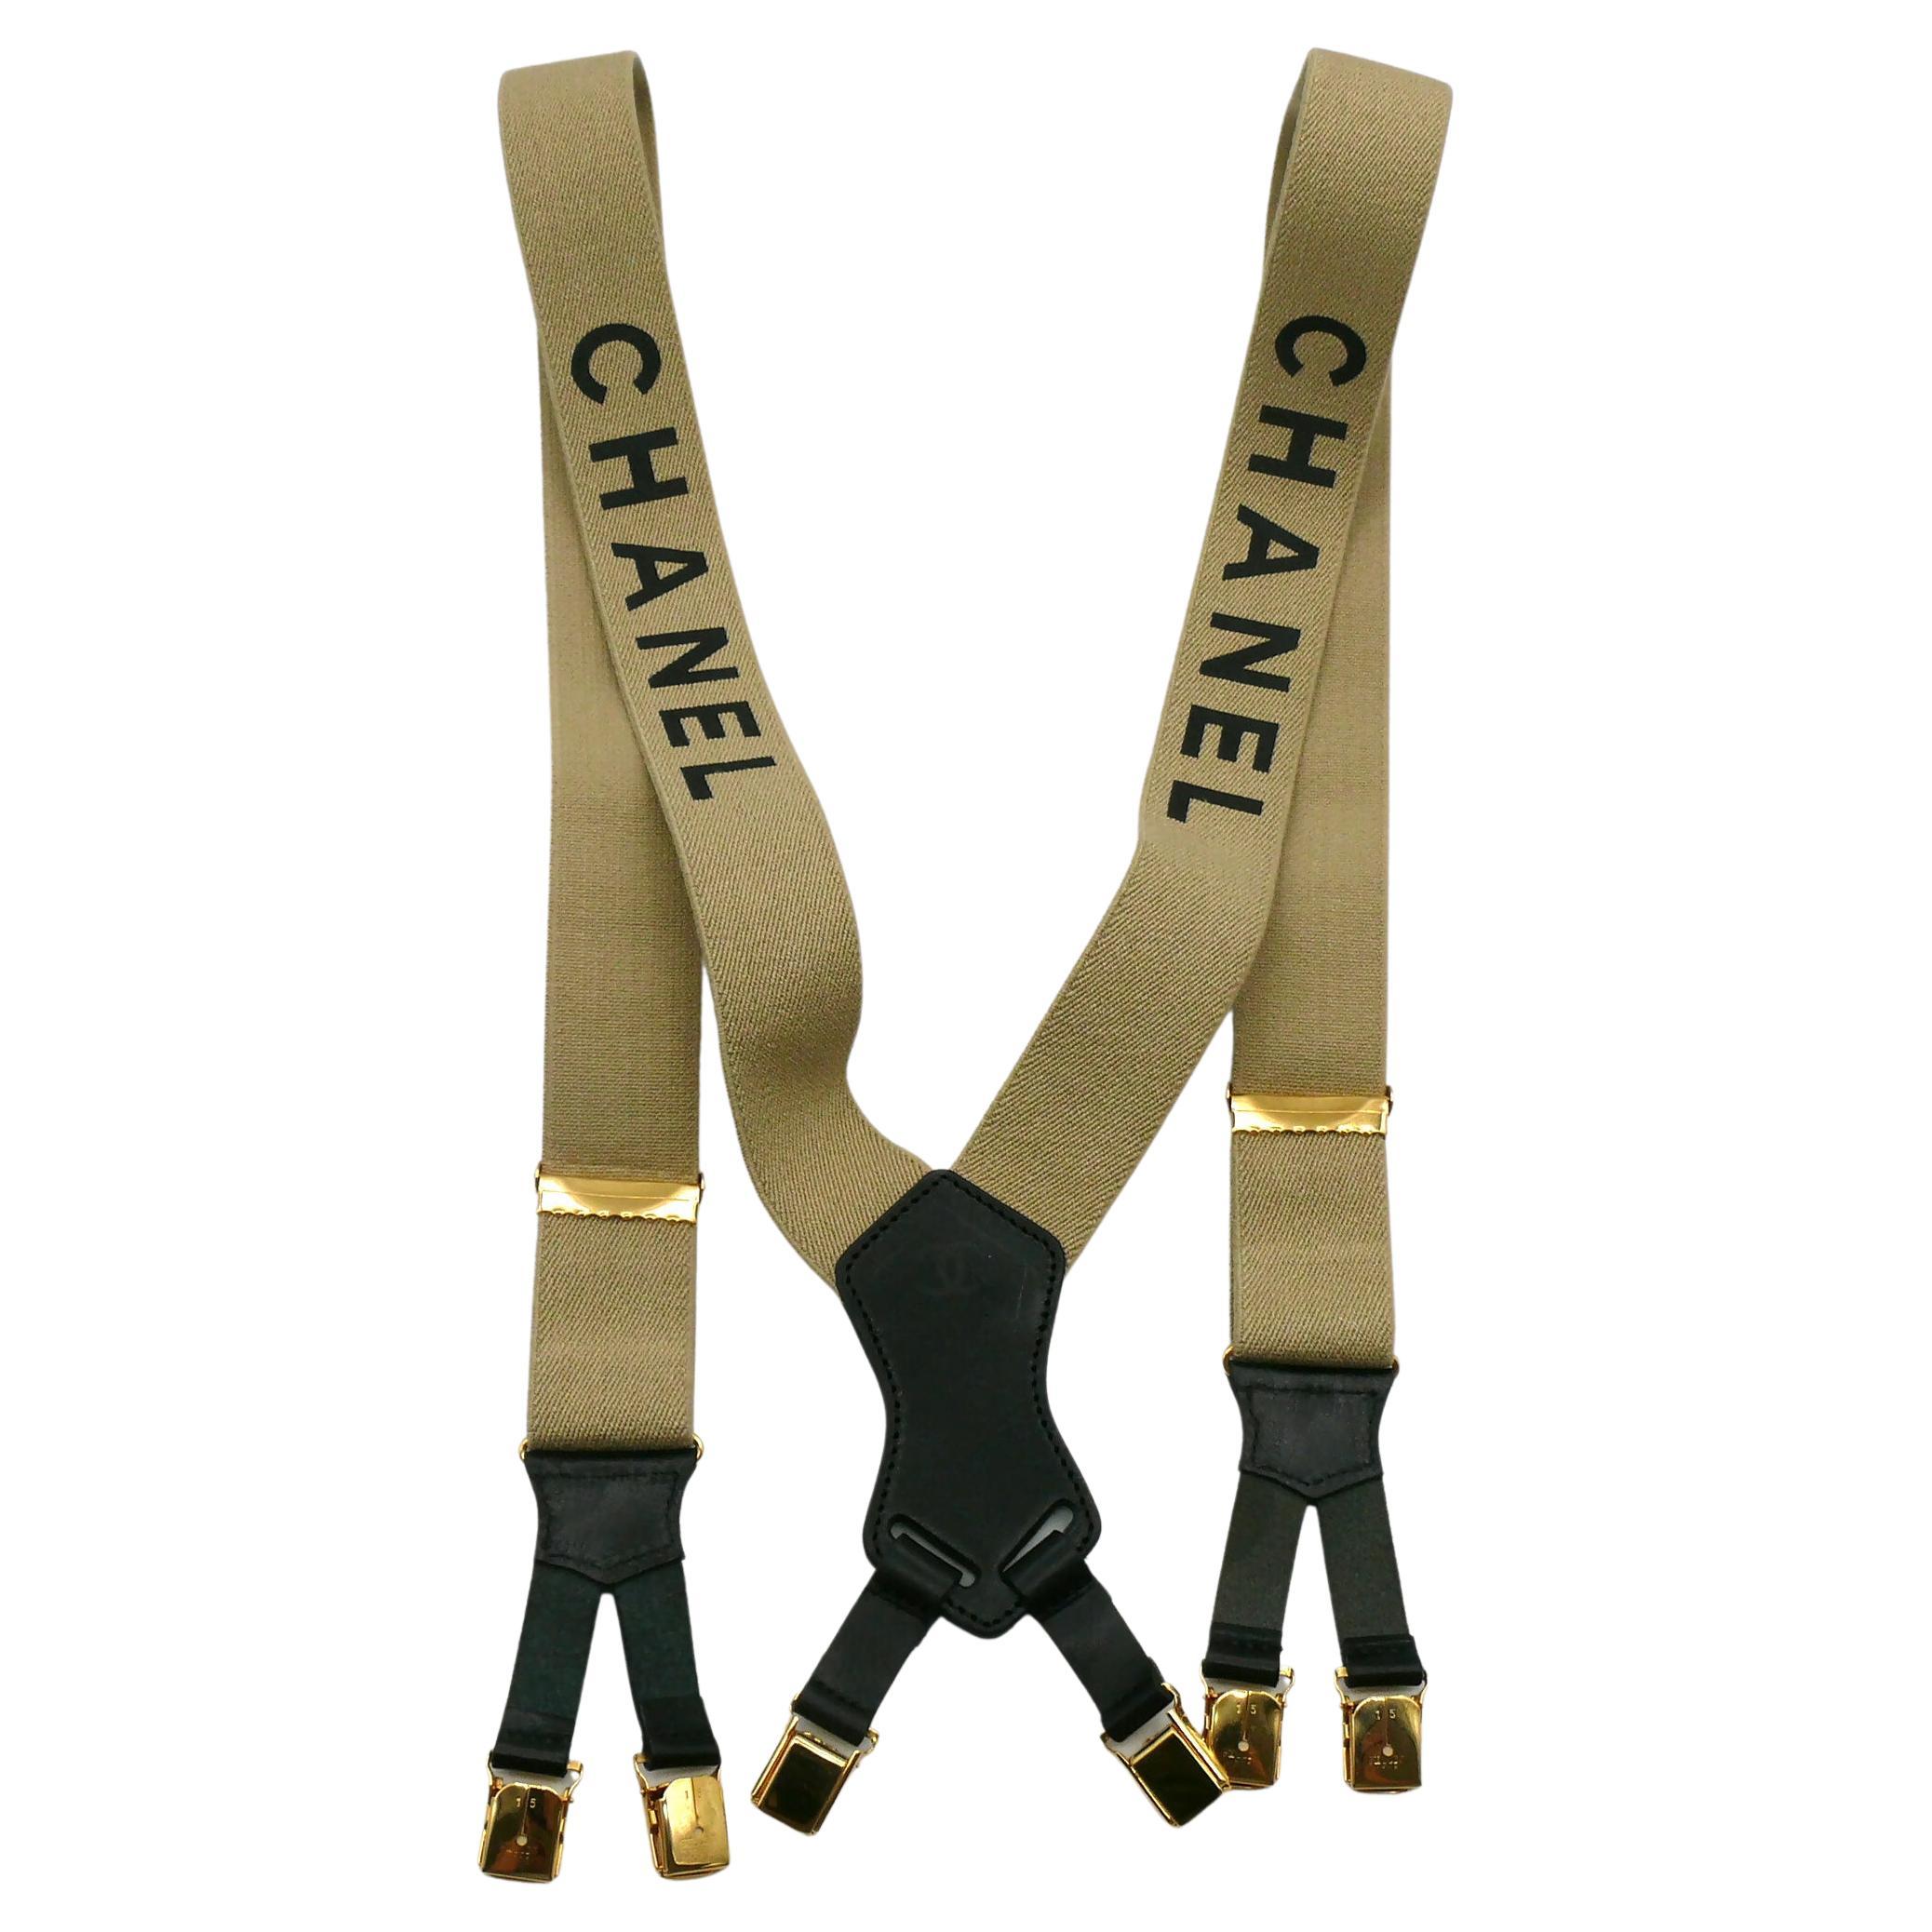 CHANEL by KARL LAGERFELD Vintage Icone Light Brown and Black Suspenders, 1994